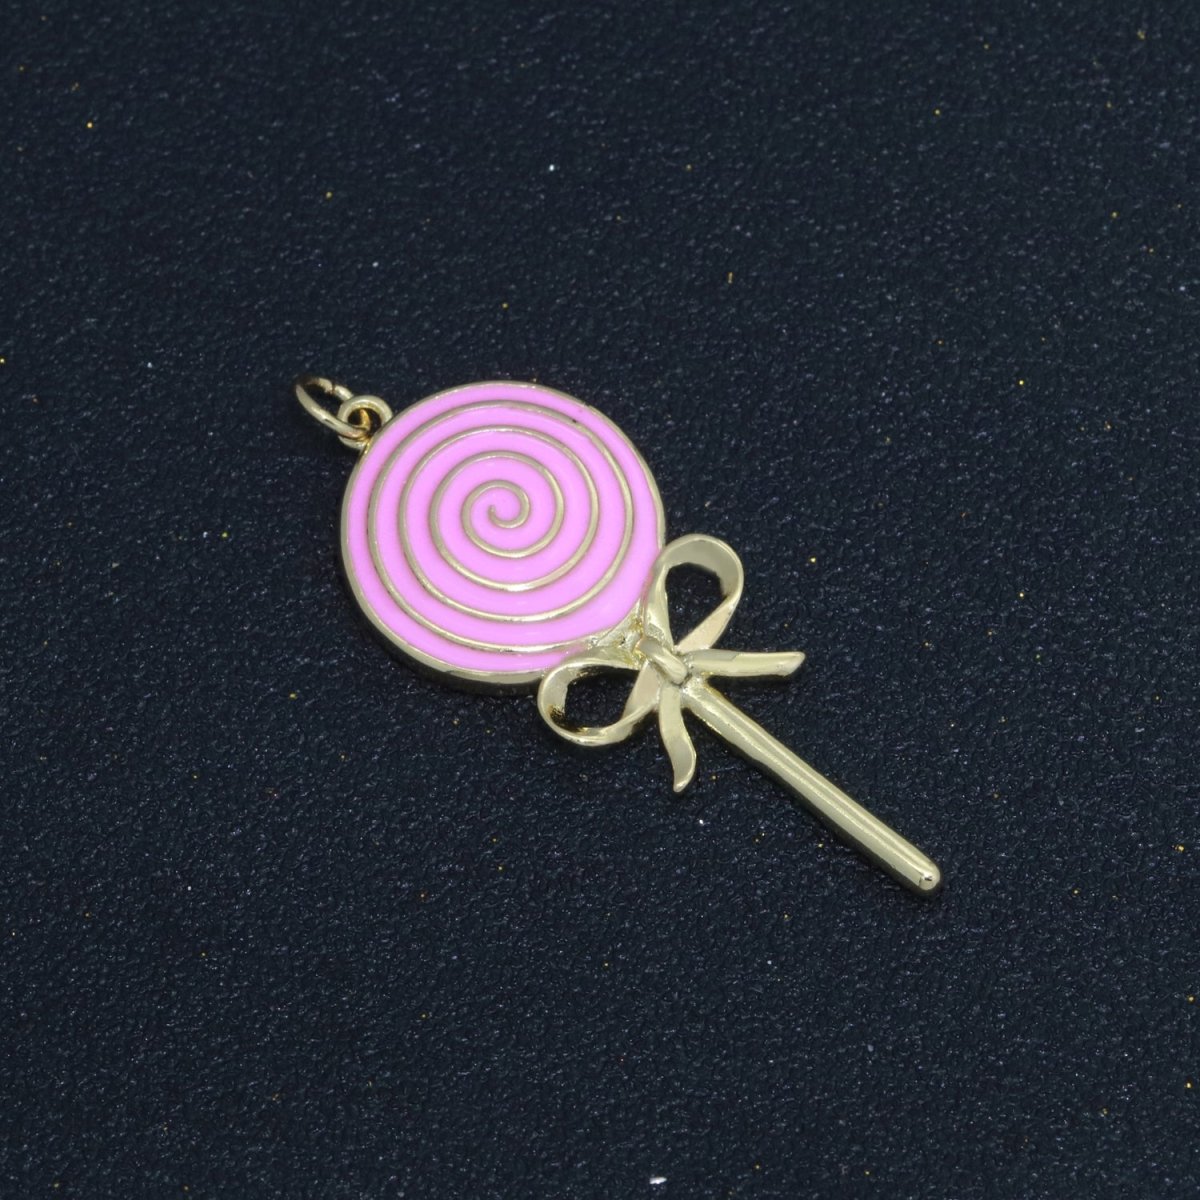 Foodie Gold Lollipop Colorful Enamel Candy Charm Inspired Pink, Green, Red, Teal, White Color M731 - M-736 - DLUXCA